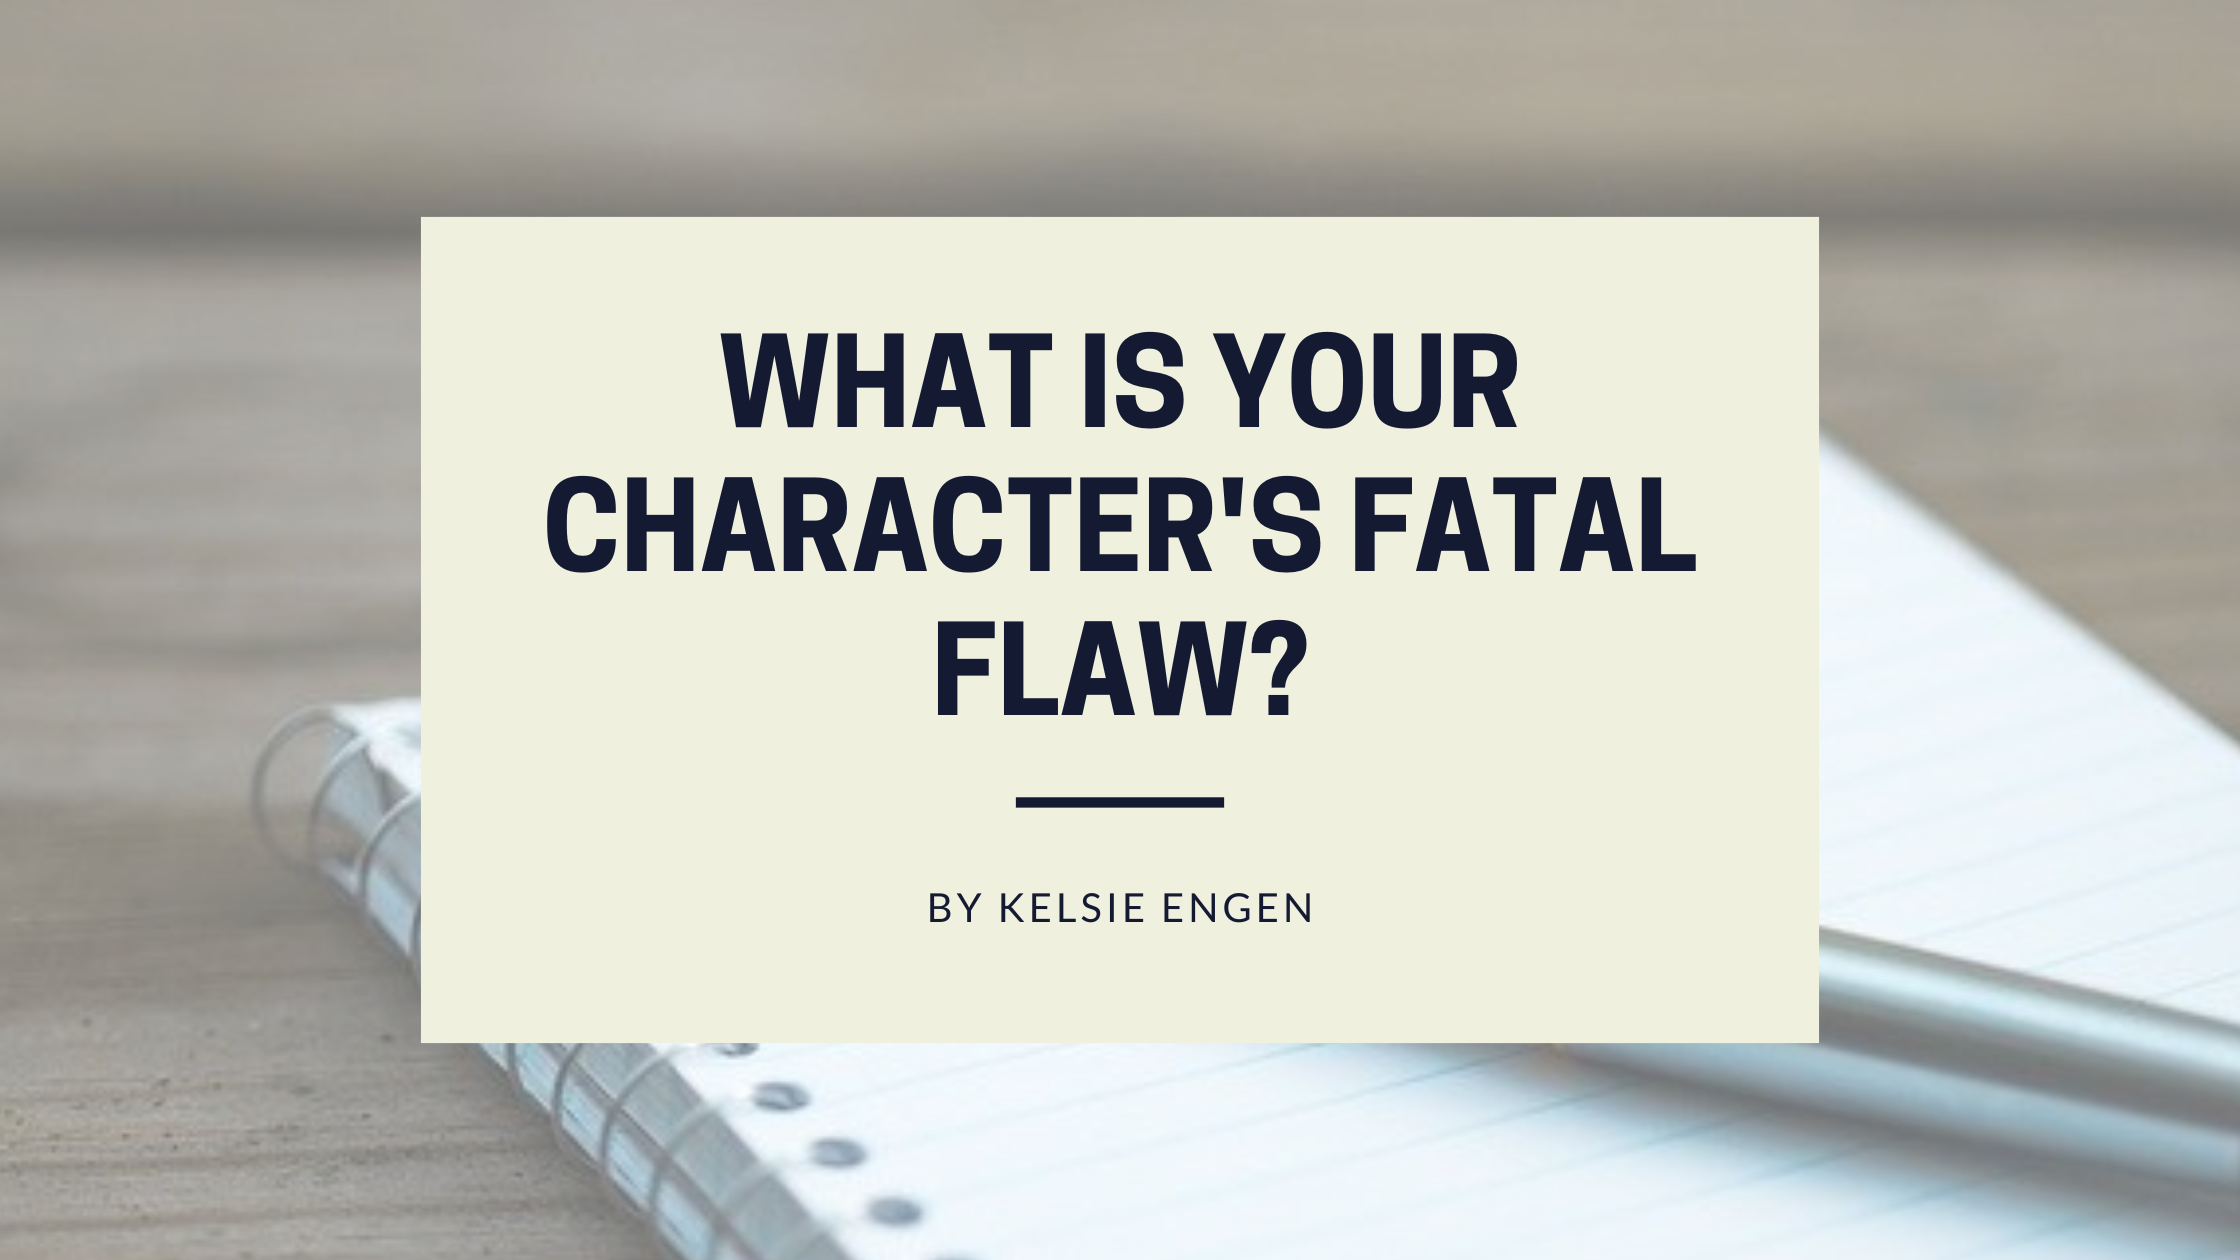 What is Your Character’s Fatal Flaw?